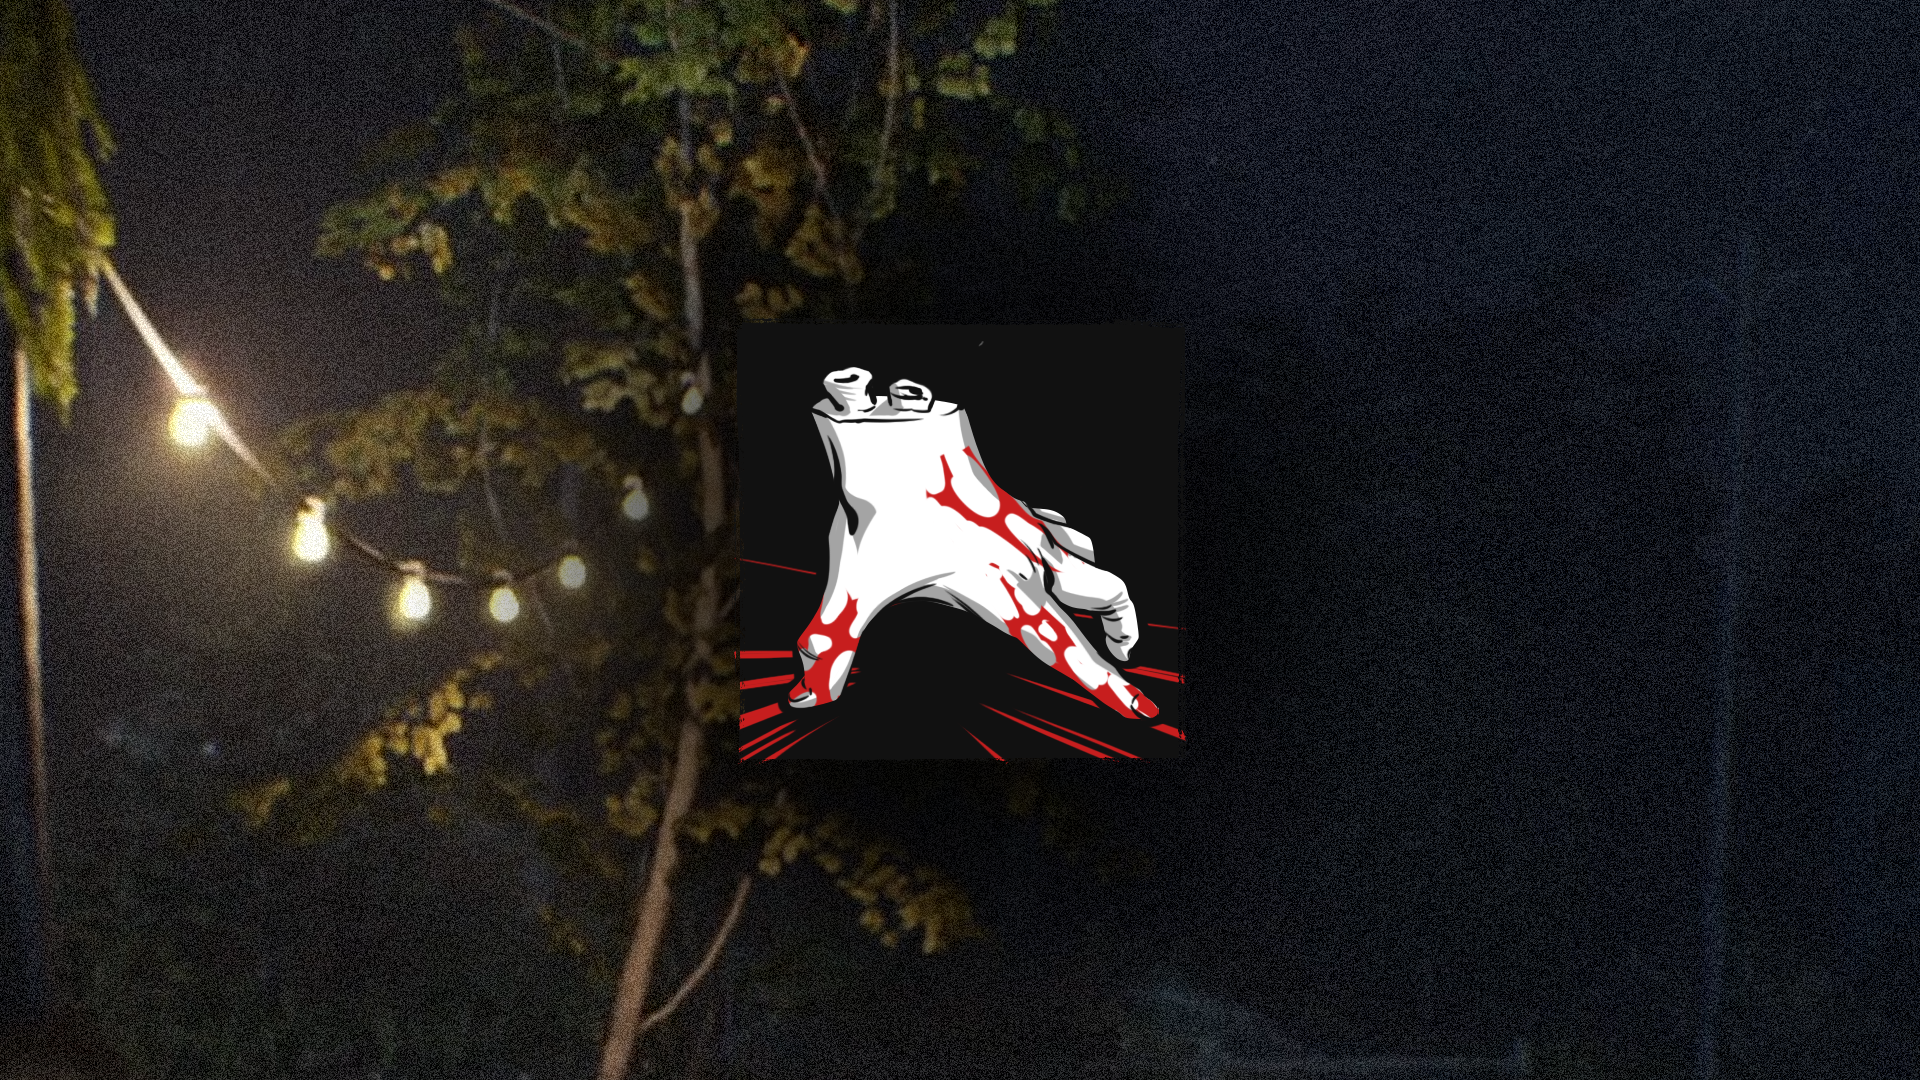 Icon for Hand Shake